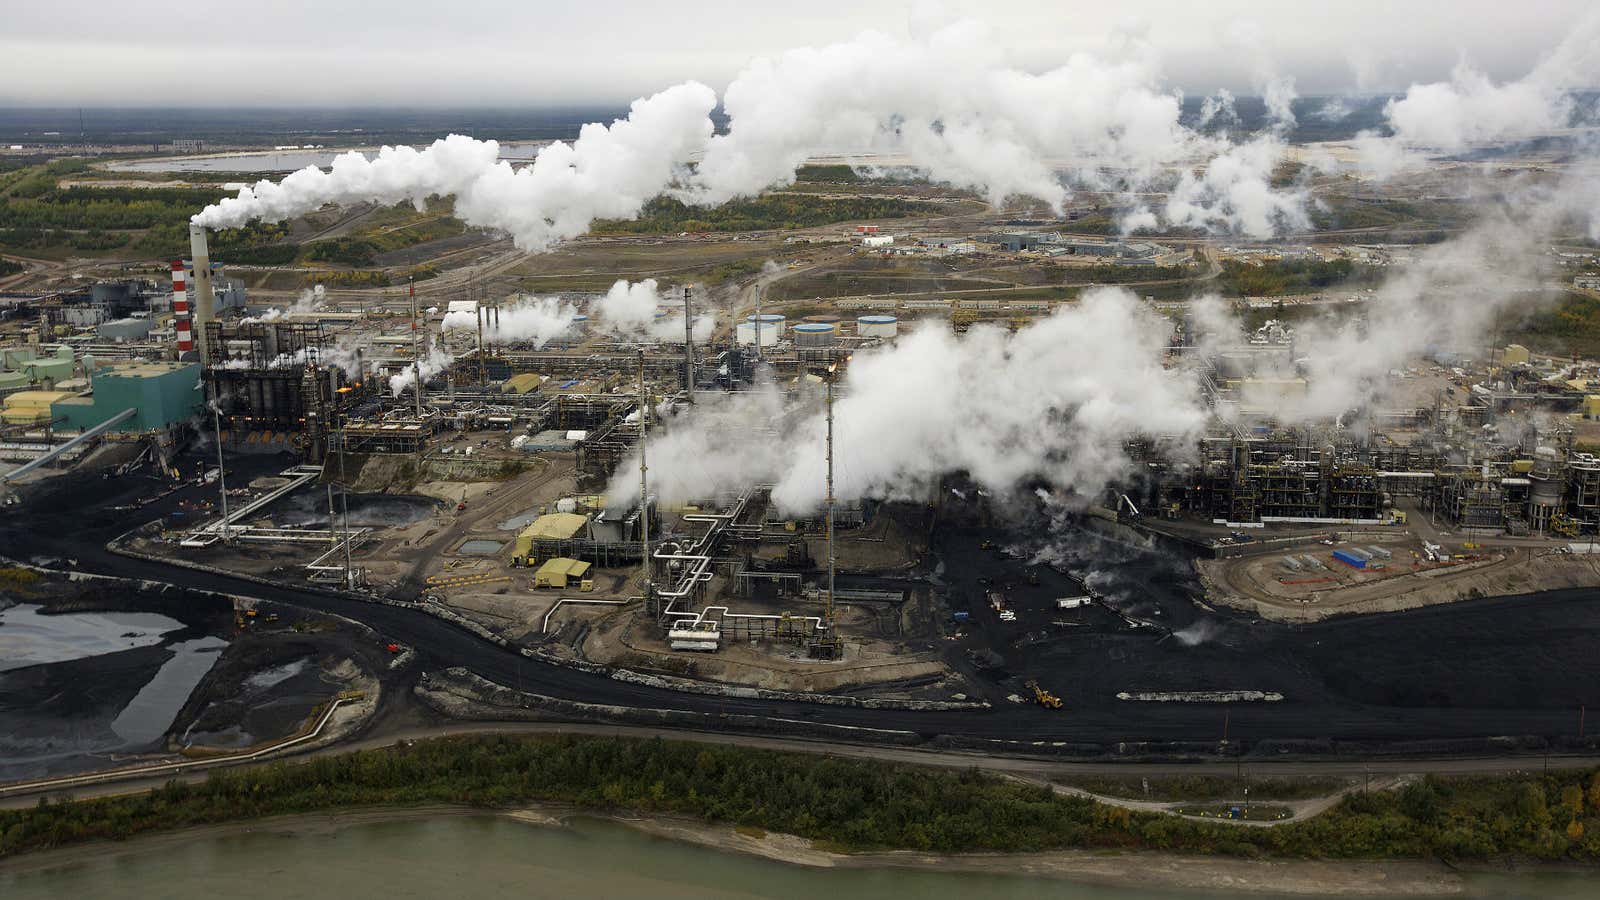 Alberta’s tar sands are looking more and more like an economic quagmire.